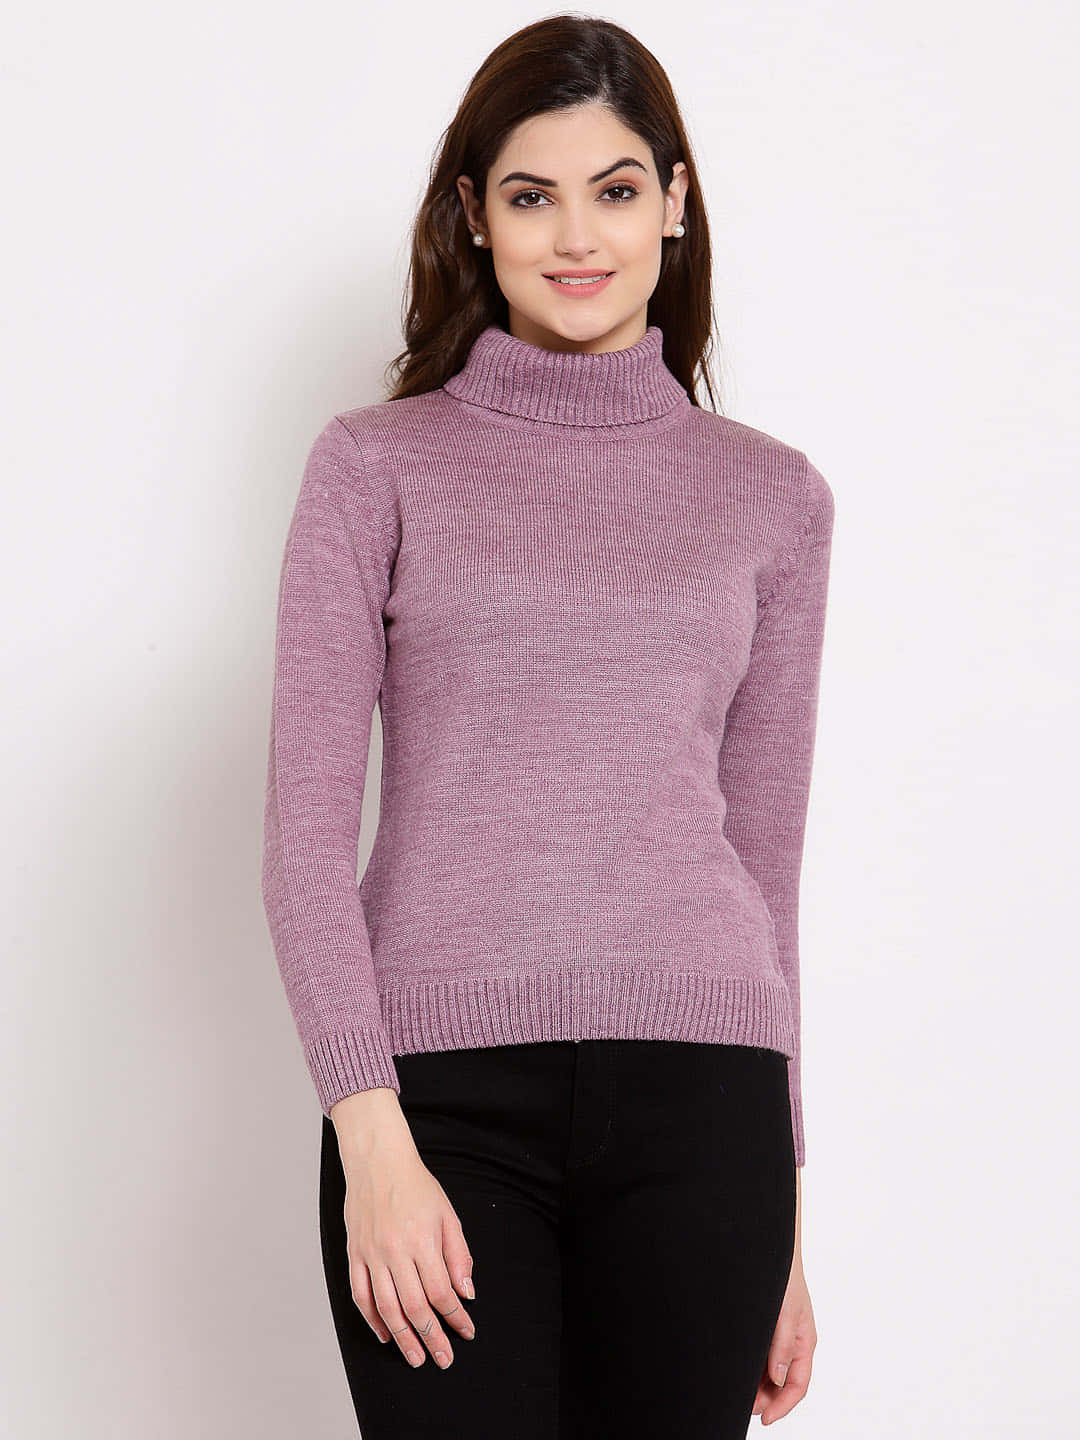 Make a statement in this stylish purple turtle-neck sweater. Wallpaper